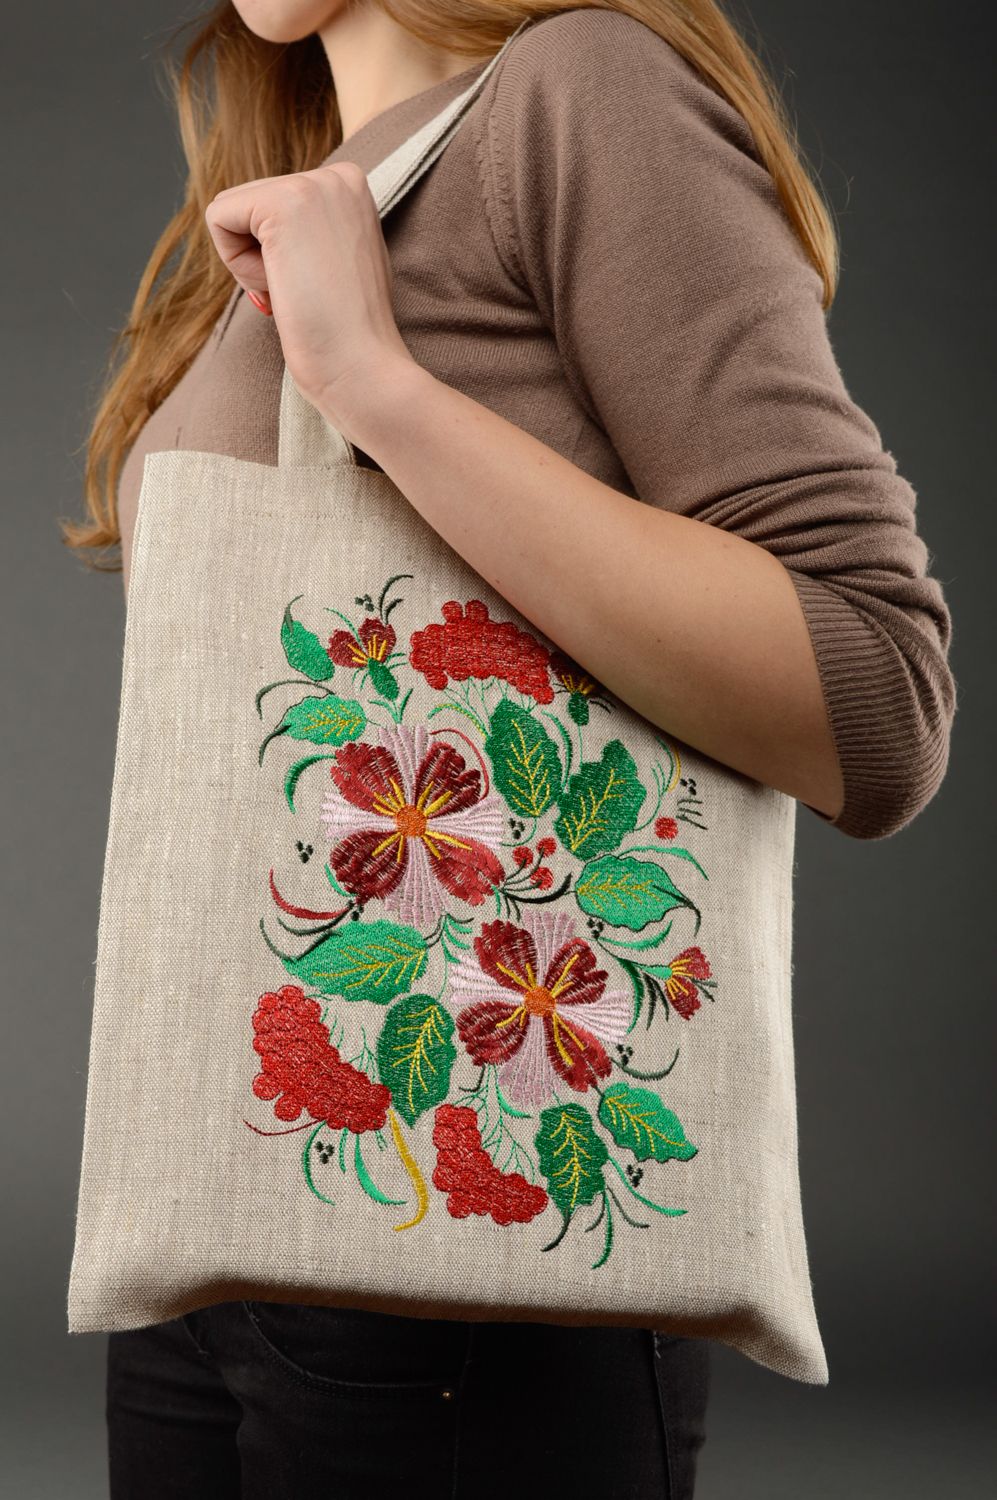 Women's fabric bag with handmade embroidery photo 2